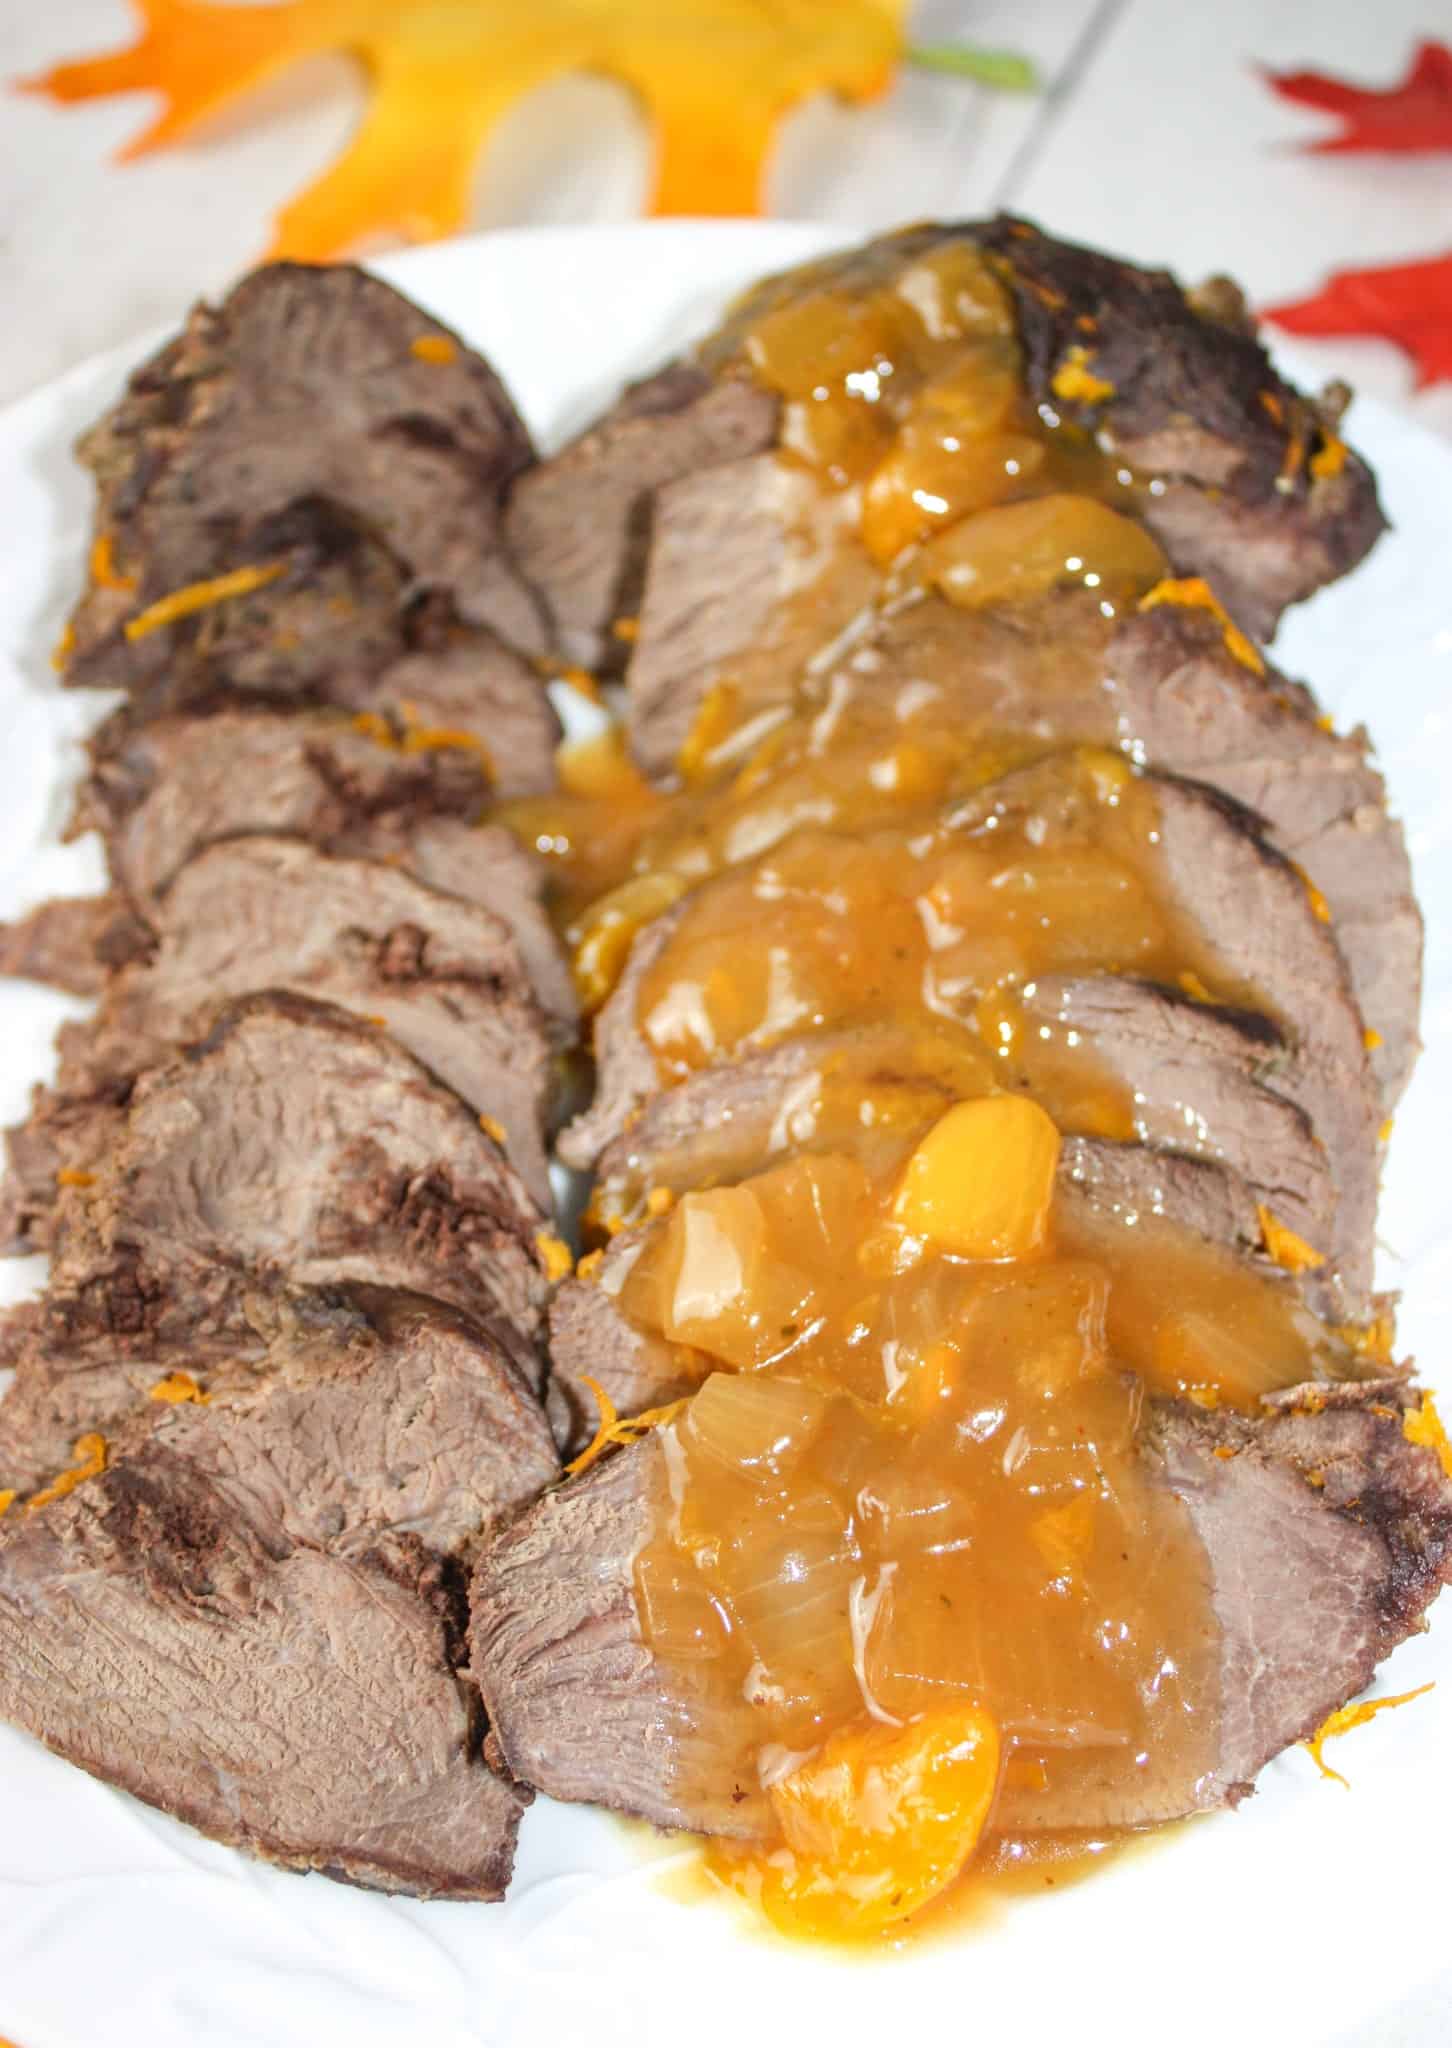 Savoury orange sauce loaded, with flavour and mandarin orange pieces, top off these Instant Pot Wild Goose Breasts. This easy pressure cooker recipe cooks the goose breasts to perfection.